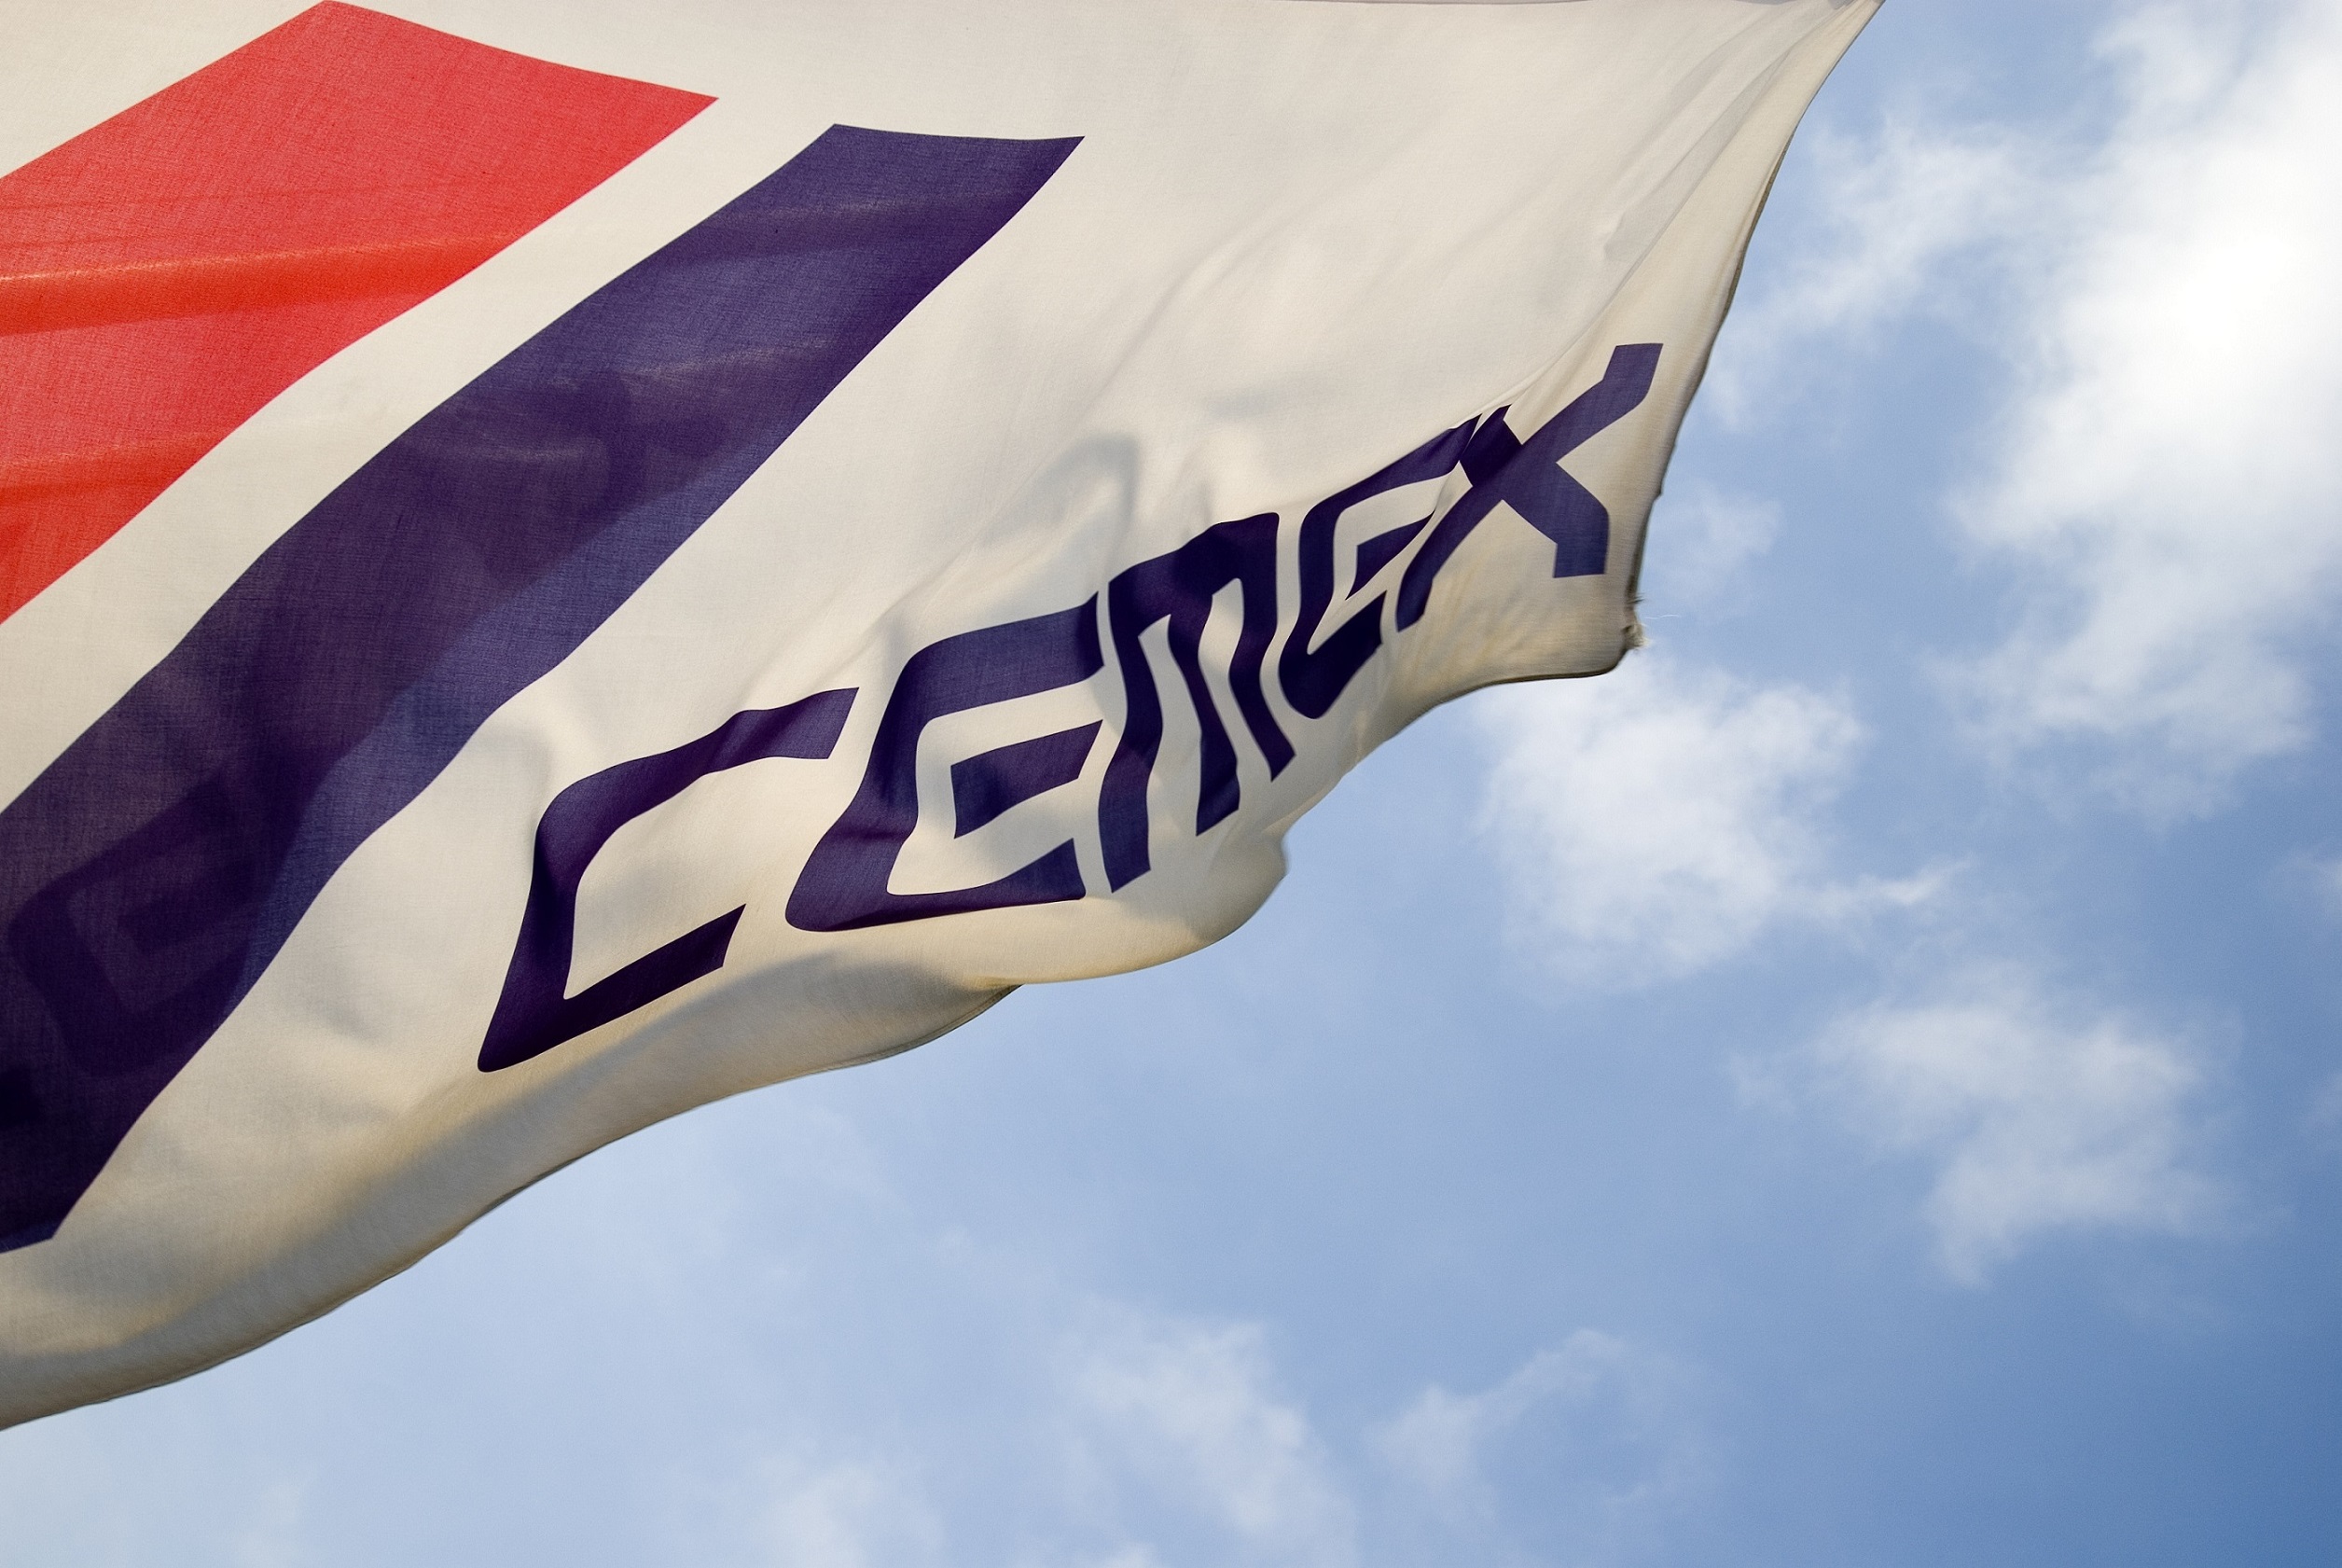 The CEMEX Building Award recognises buildings that give value to those who interact with them